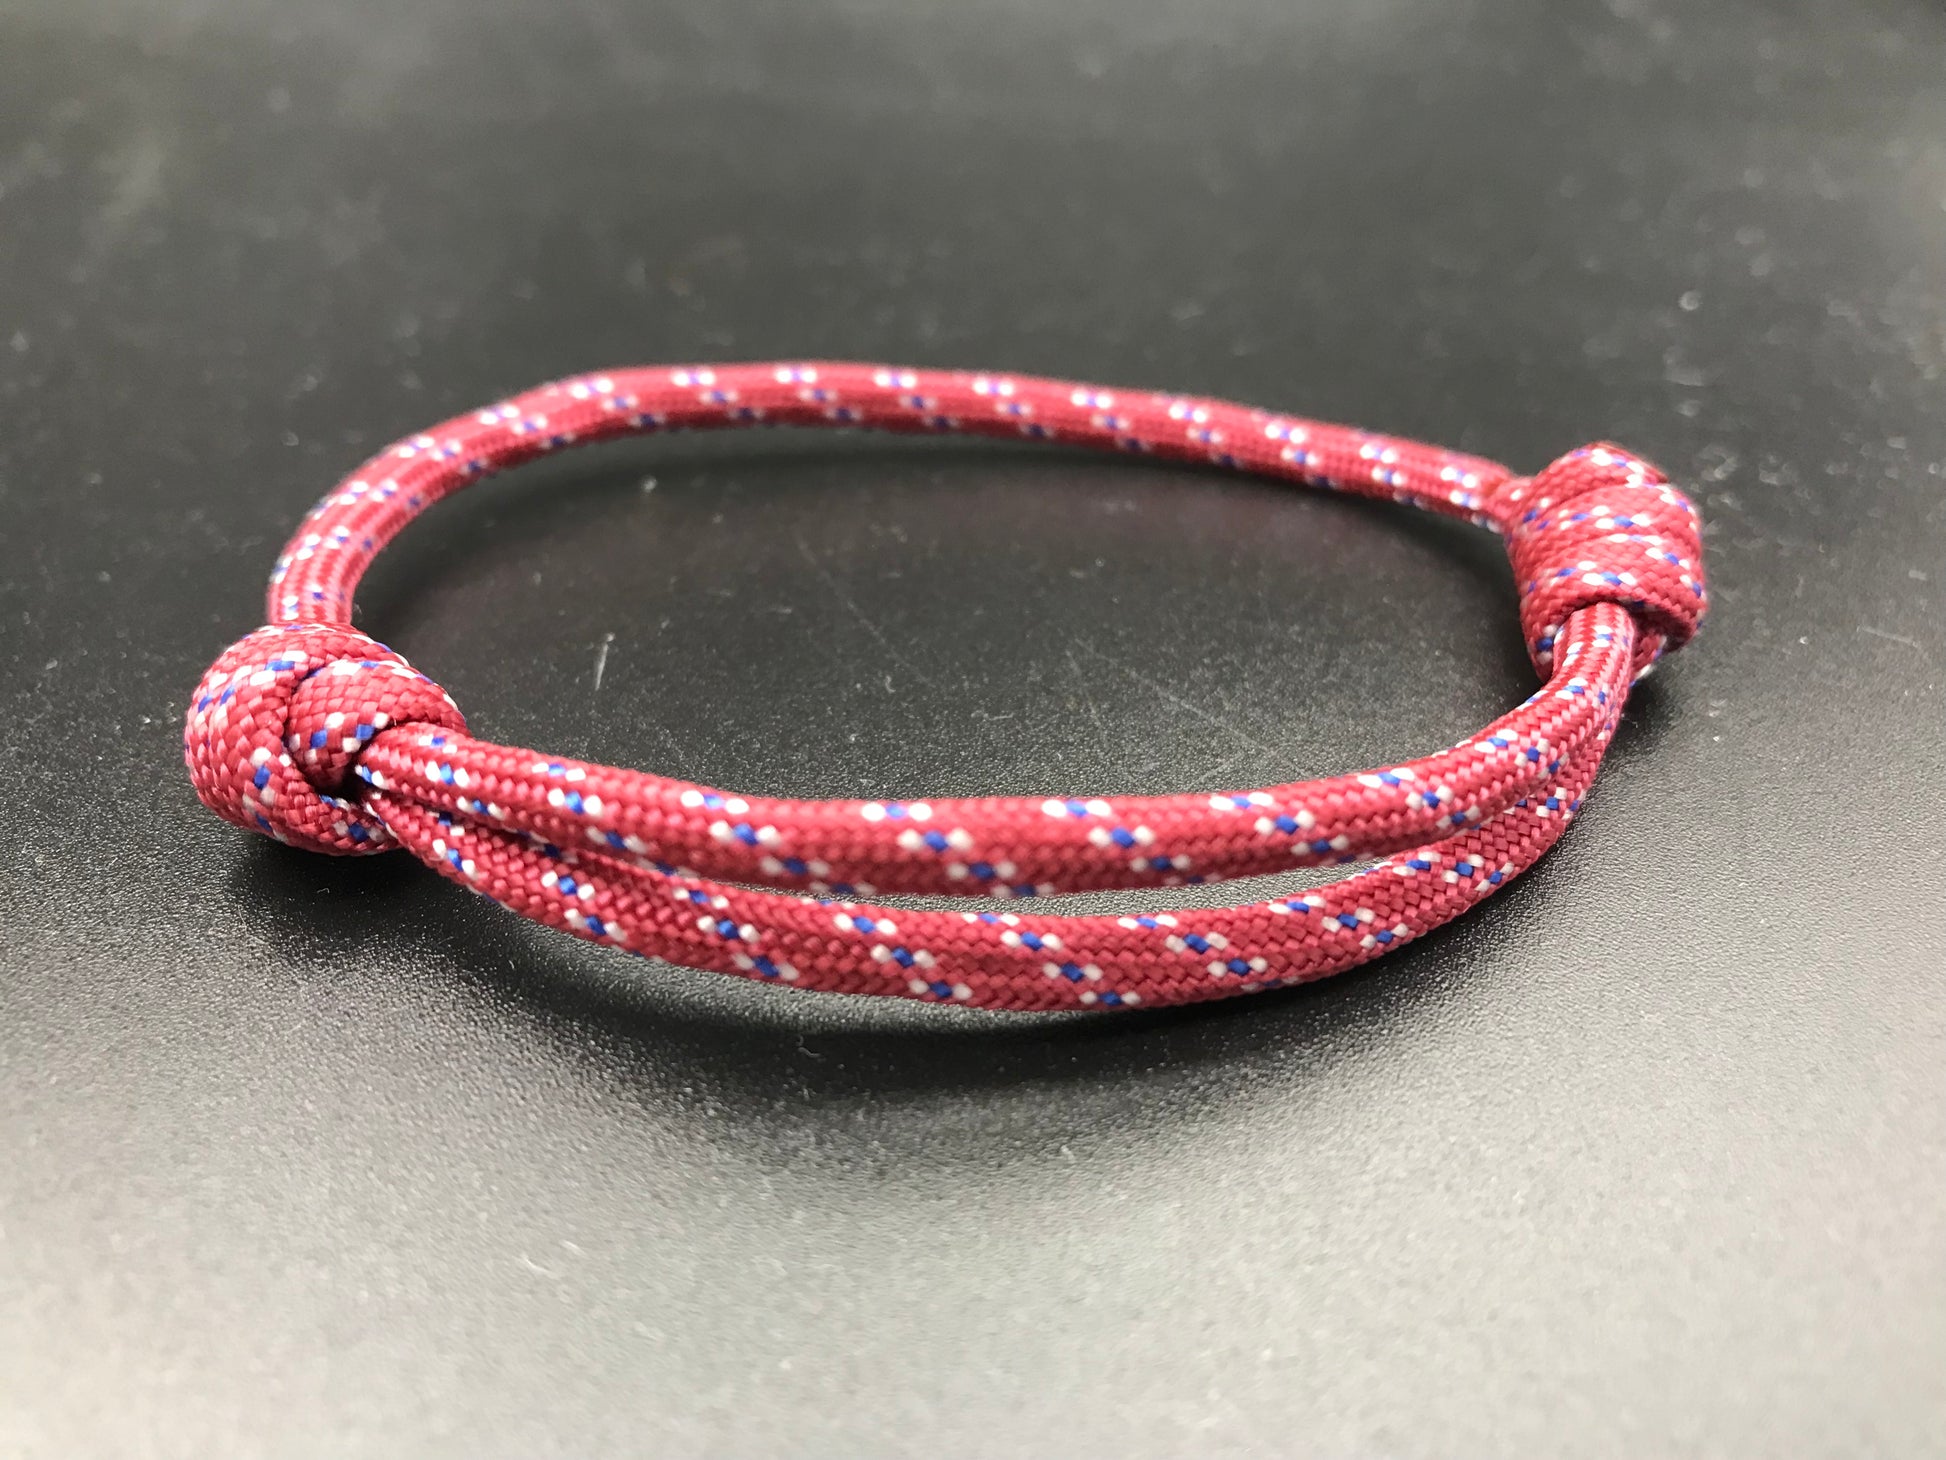 Paracord friendship bracelet in a dull red with white dots